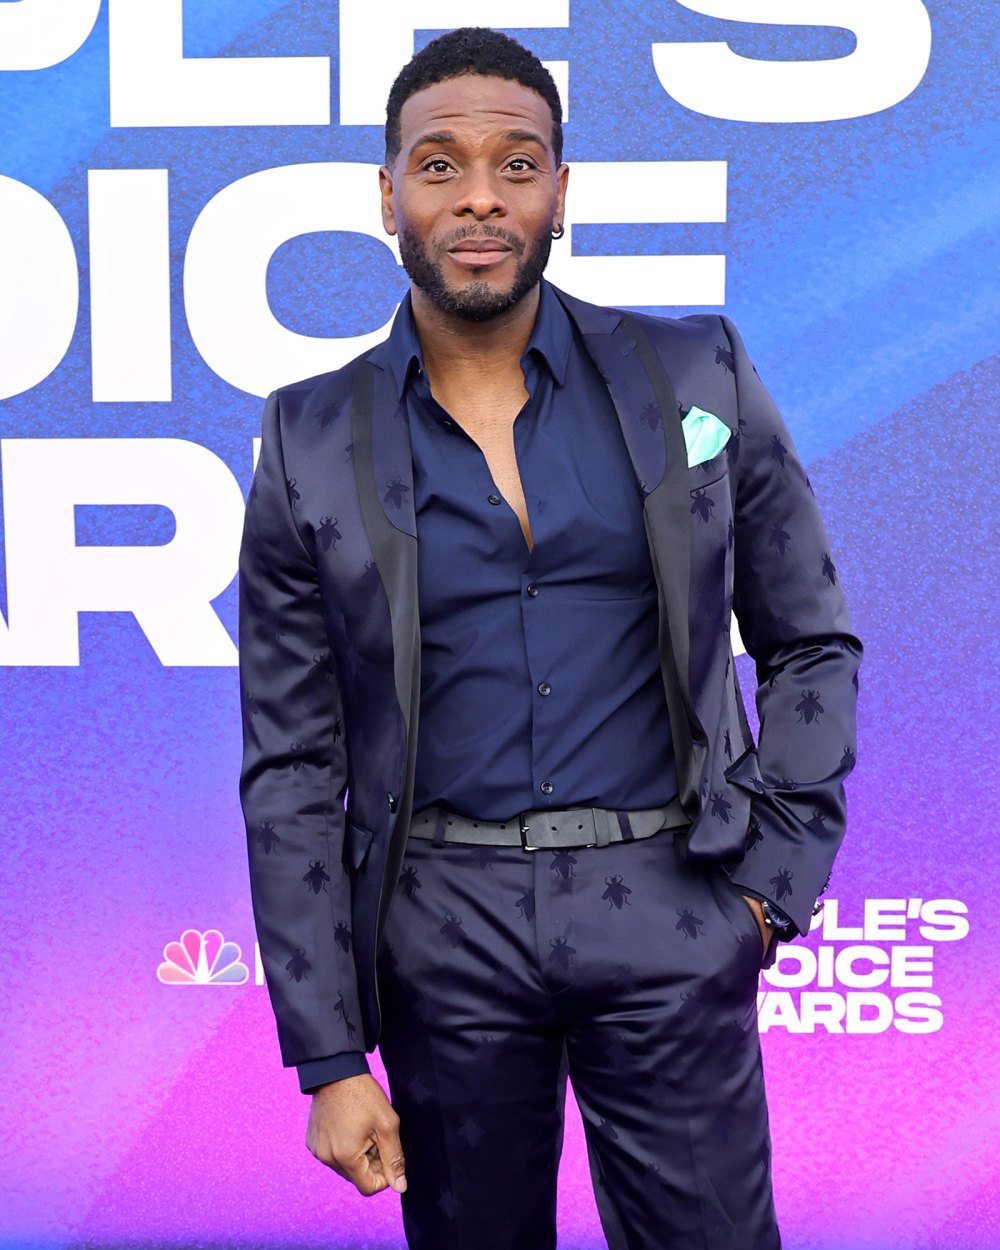 Kel Mitchell Is Home Recovering After ‘Frightening’ Health Incident: ‘The Scare Was Real’